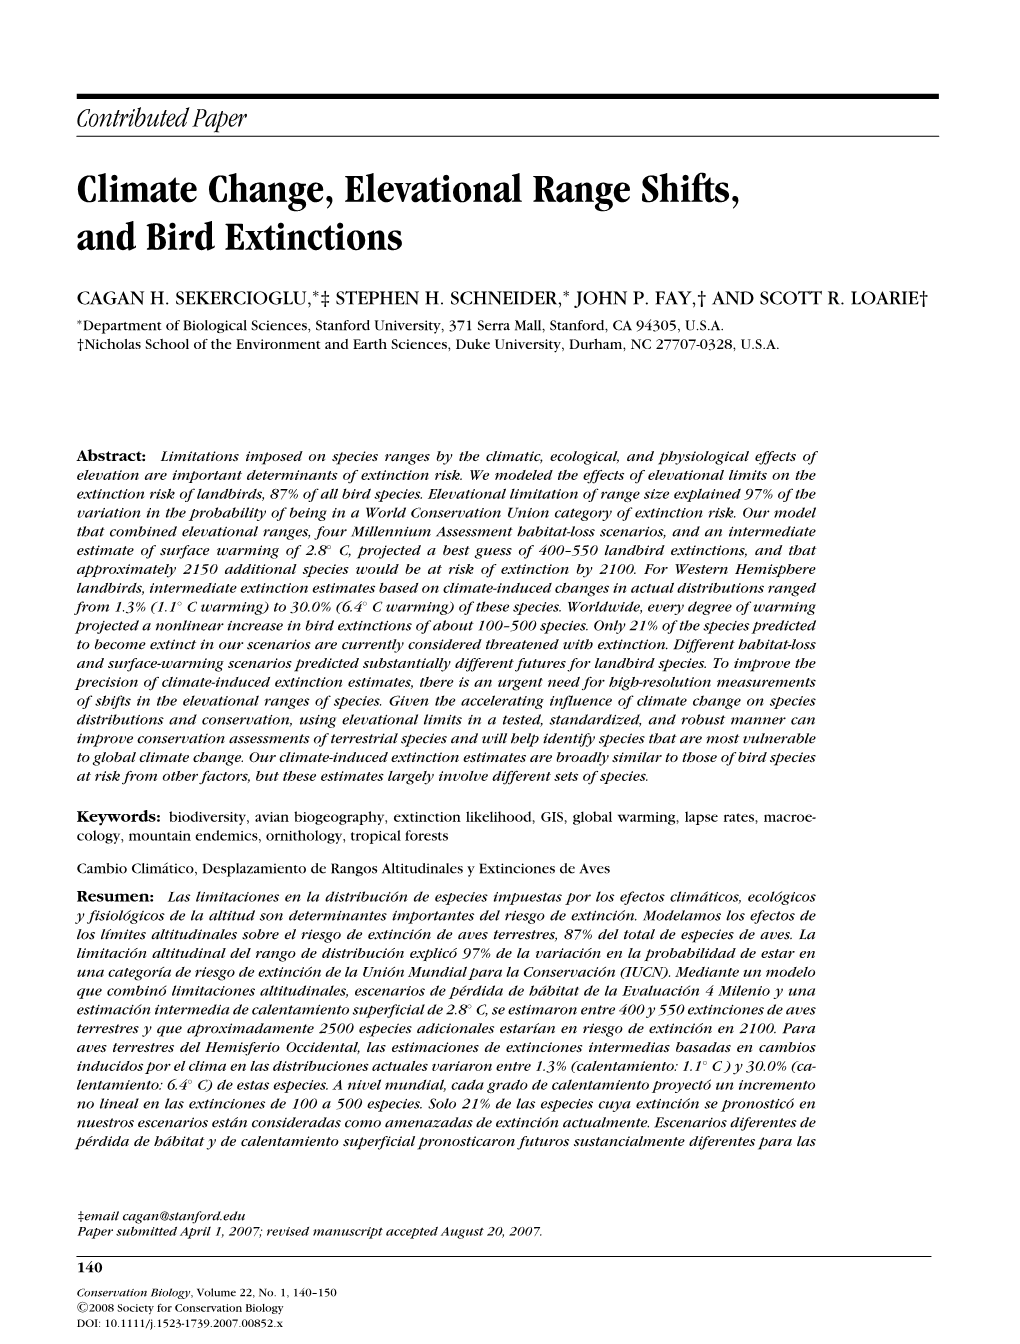 Climate Change, Elevational Range Shifts, and Bird Extinctions